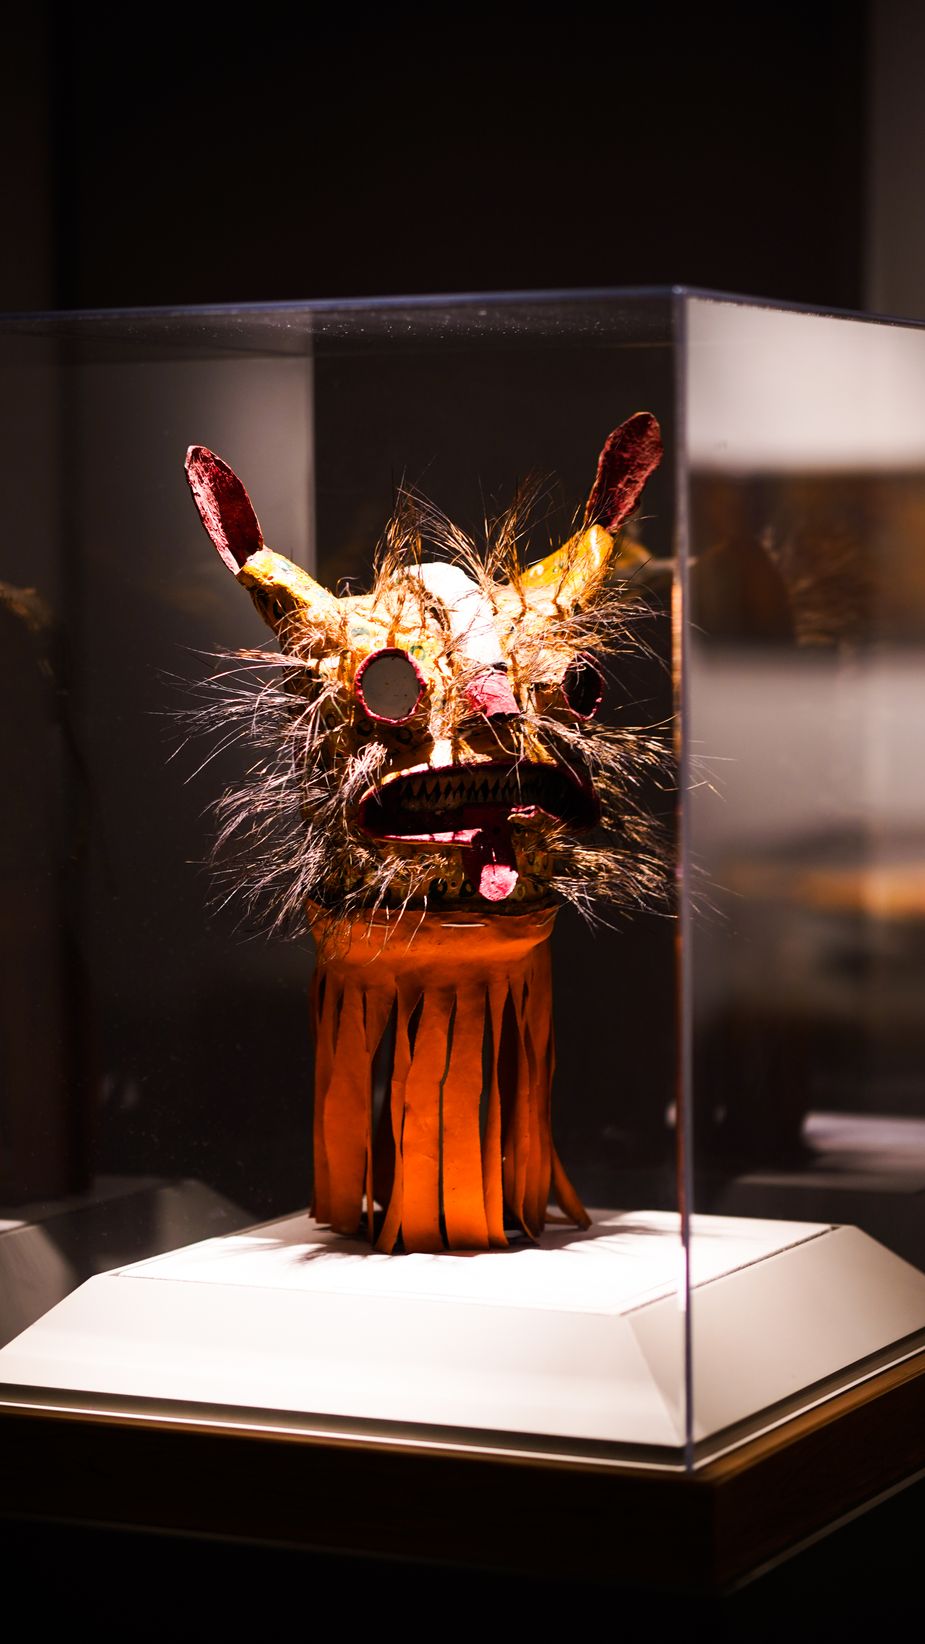 This Nahua "el tigre" mask was made in the Mexican state of Guerrero around 1985 and is worn during festival dances to represent a jaguar character. Photo by Laci Schwoegler/Retrospec Films